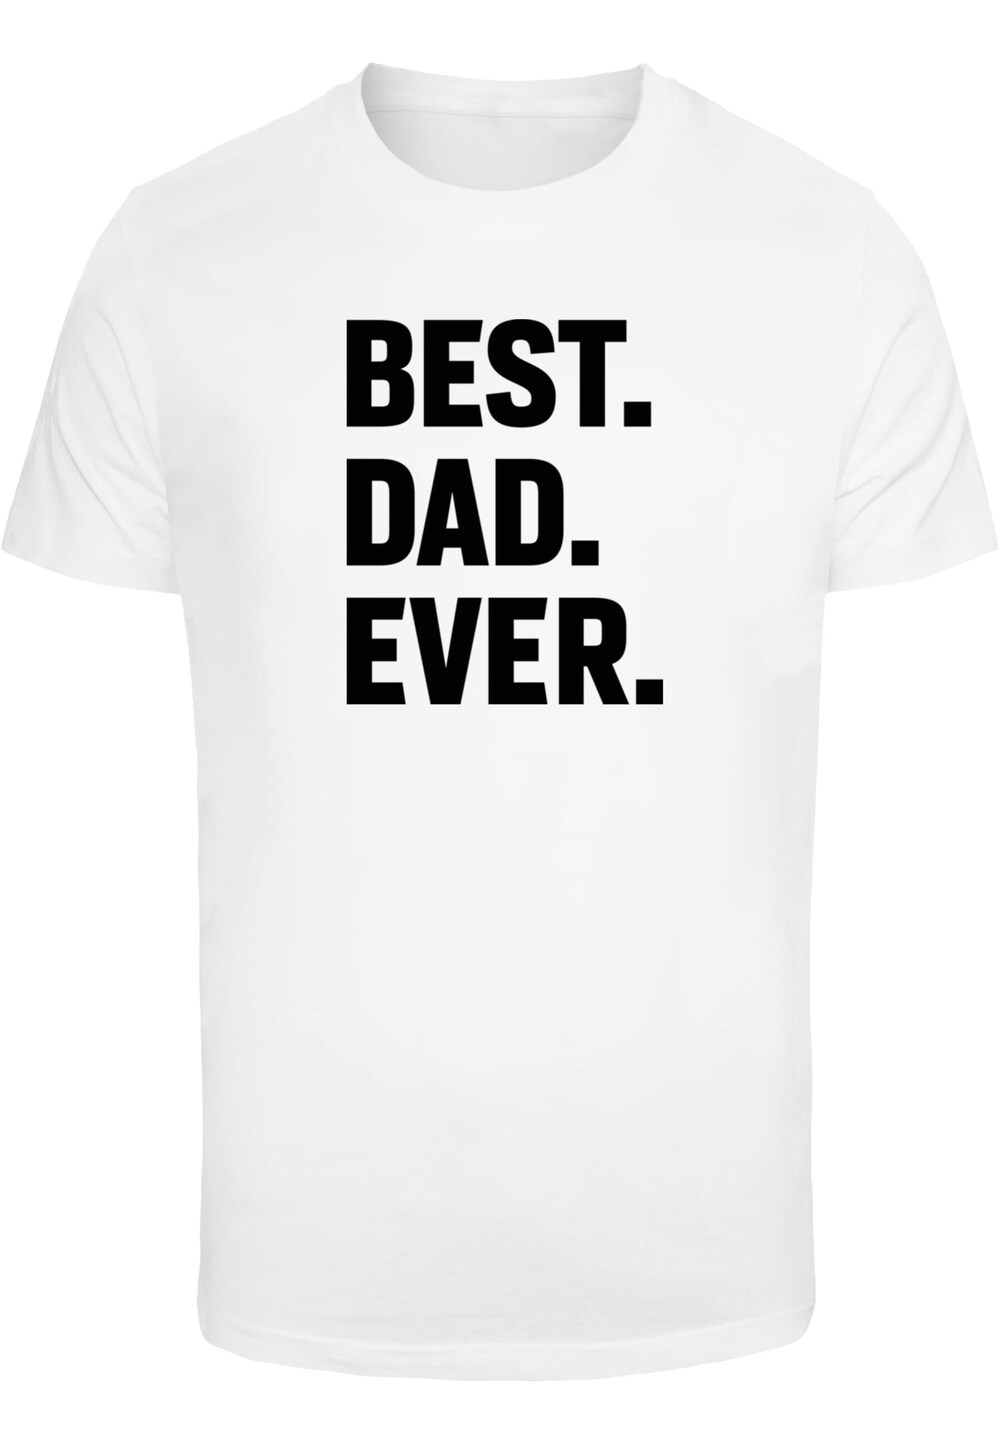 Футболка Merchcode Fathers Day - Best Dad Ever, белый engineer dad ever fathers day t shirt short casual cotton o neck men clothing customized products